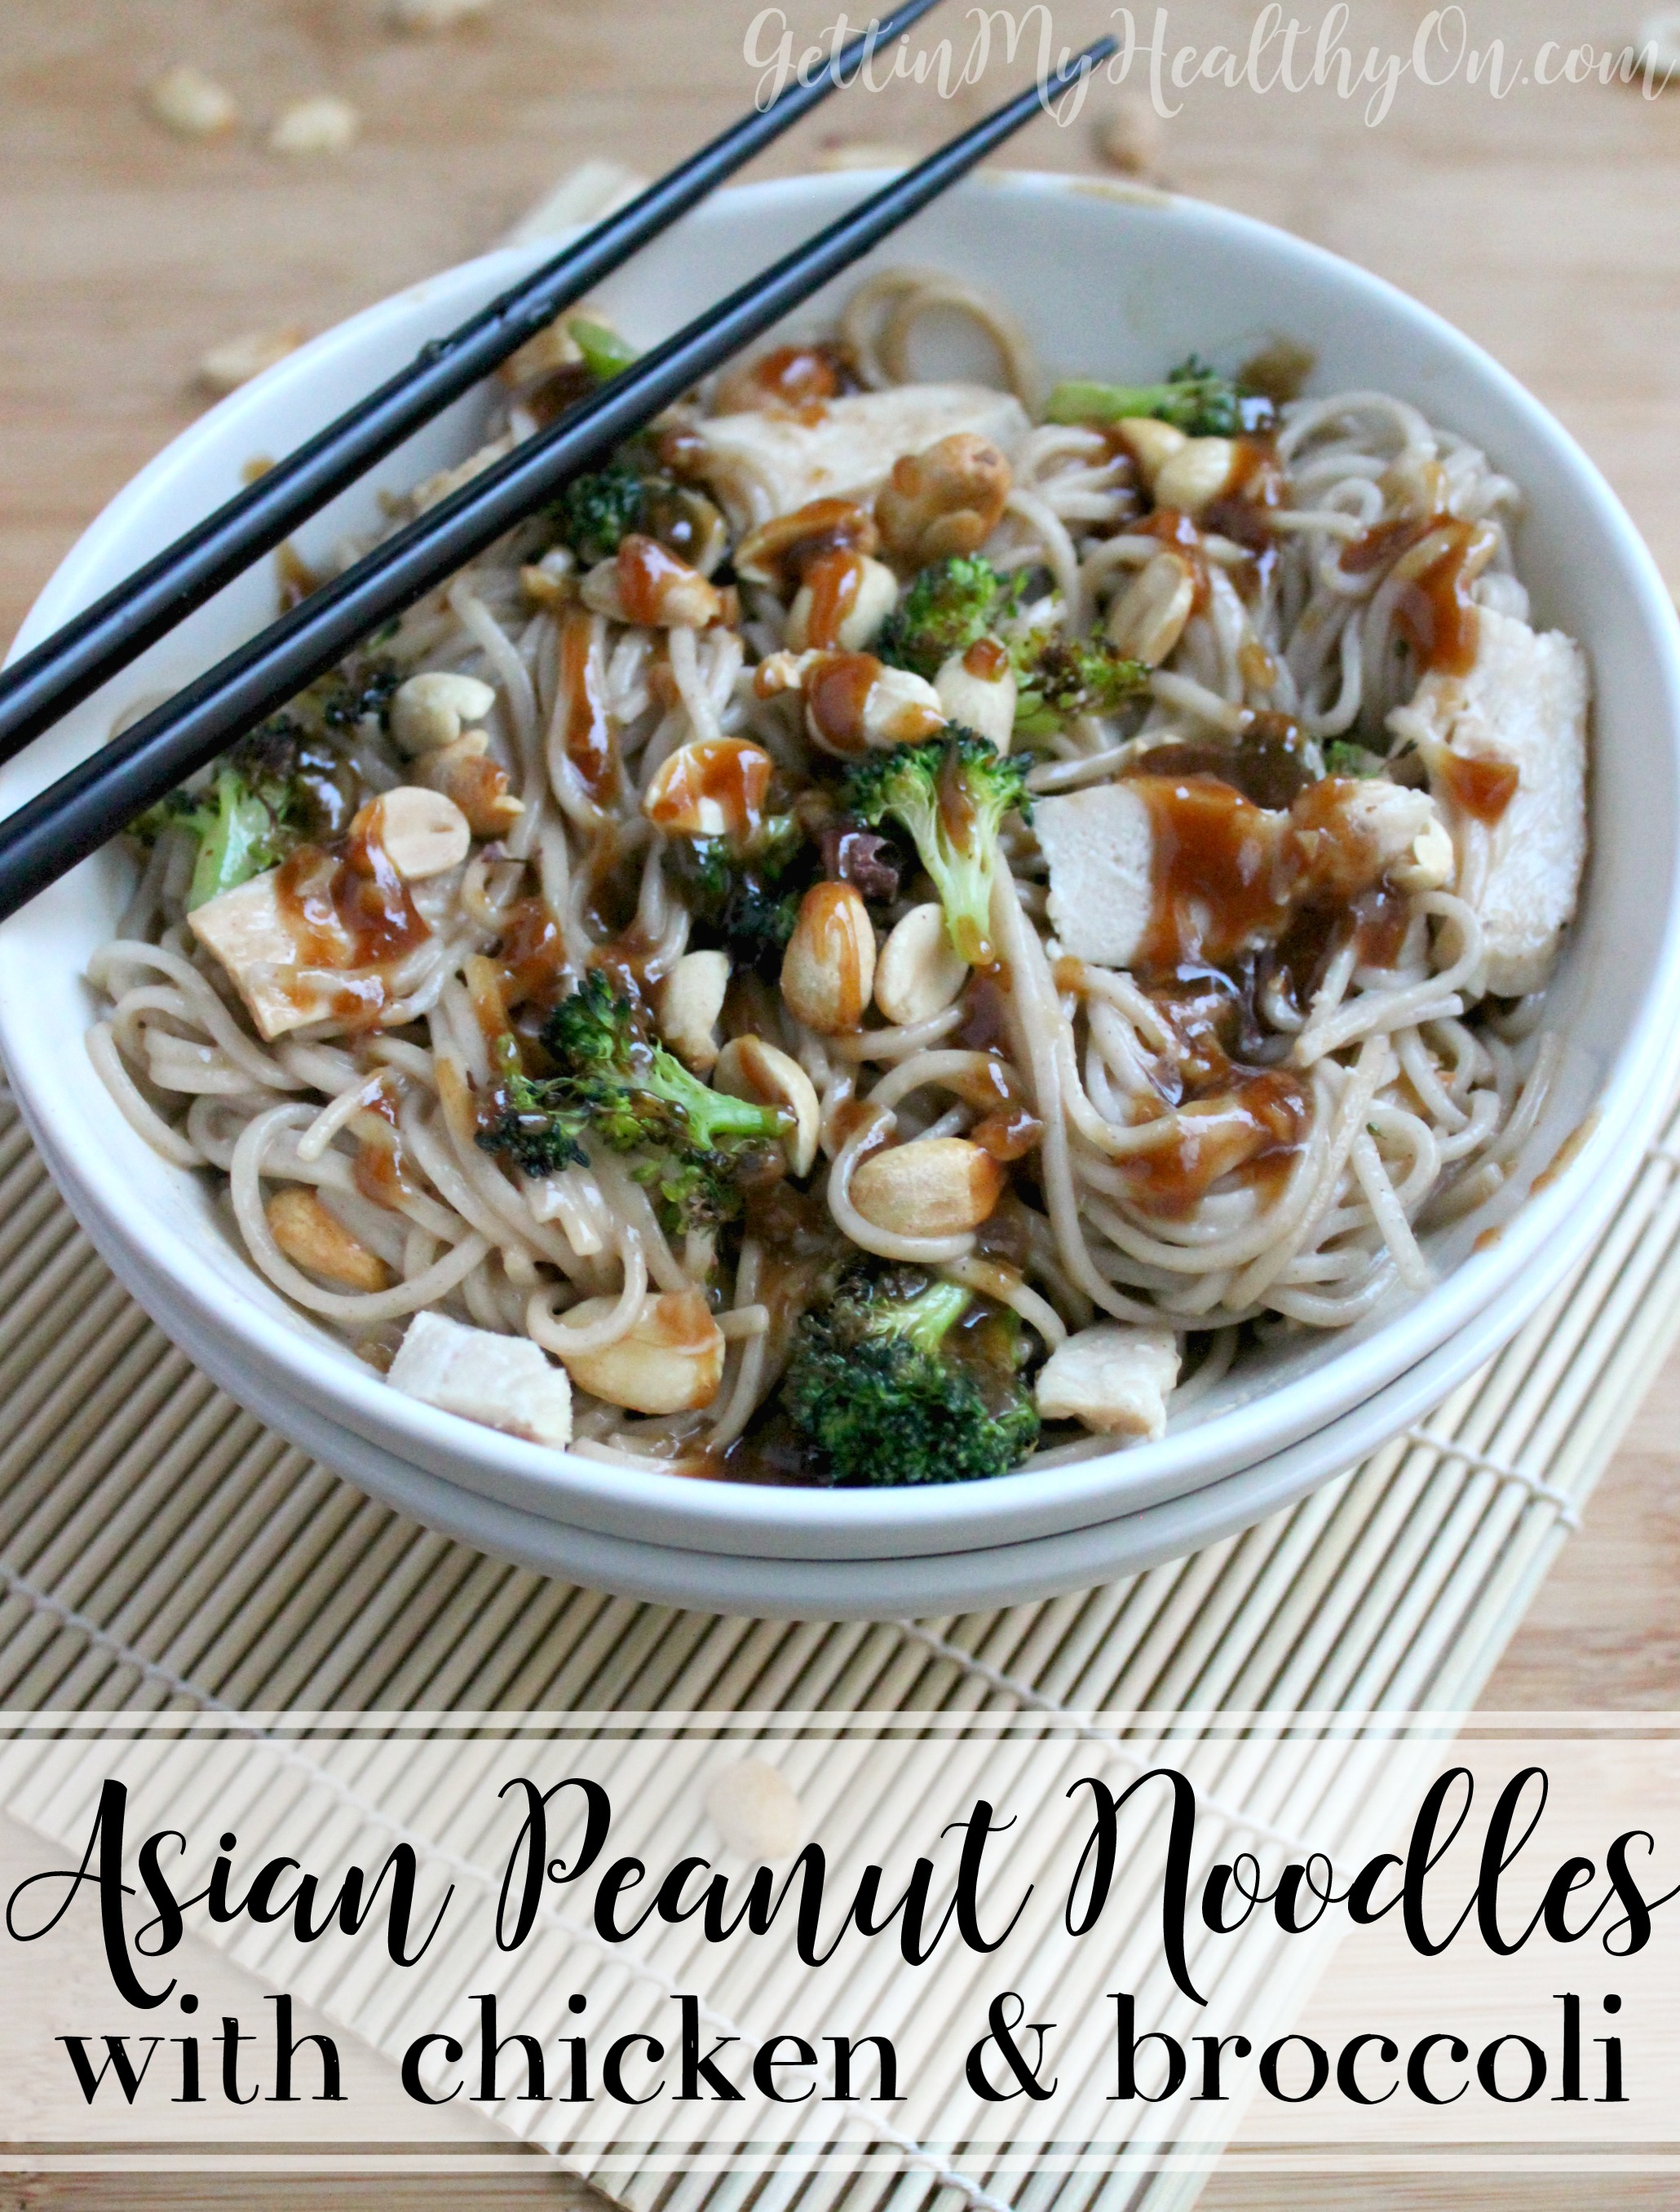 Asian Peanut Noodles with Chicken and Broccoli